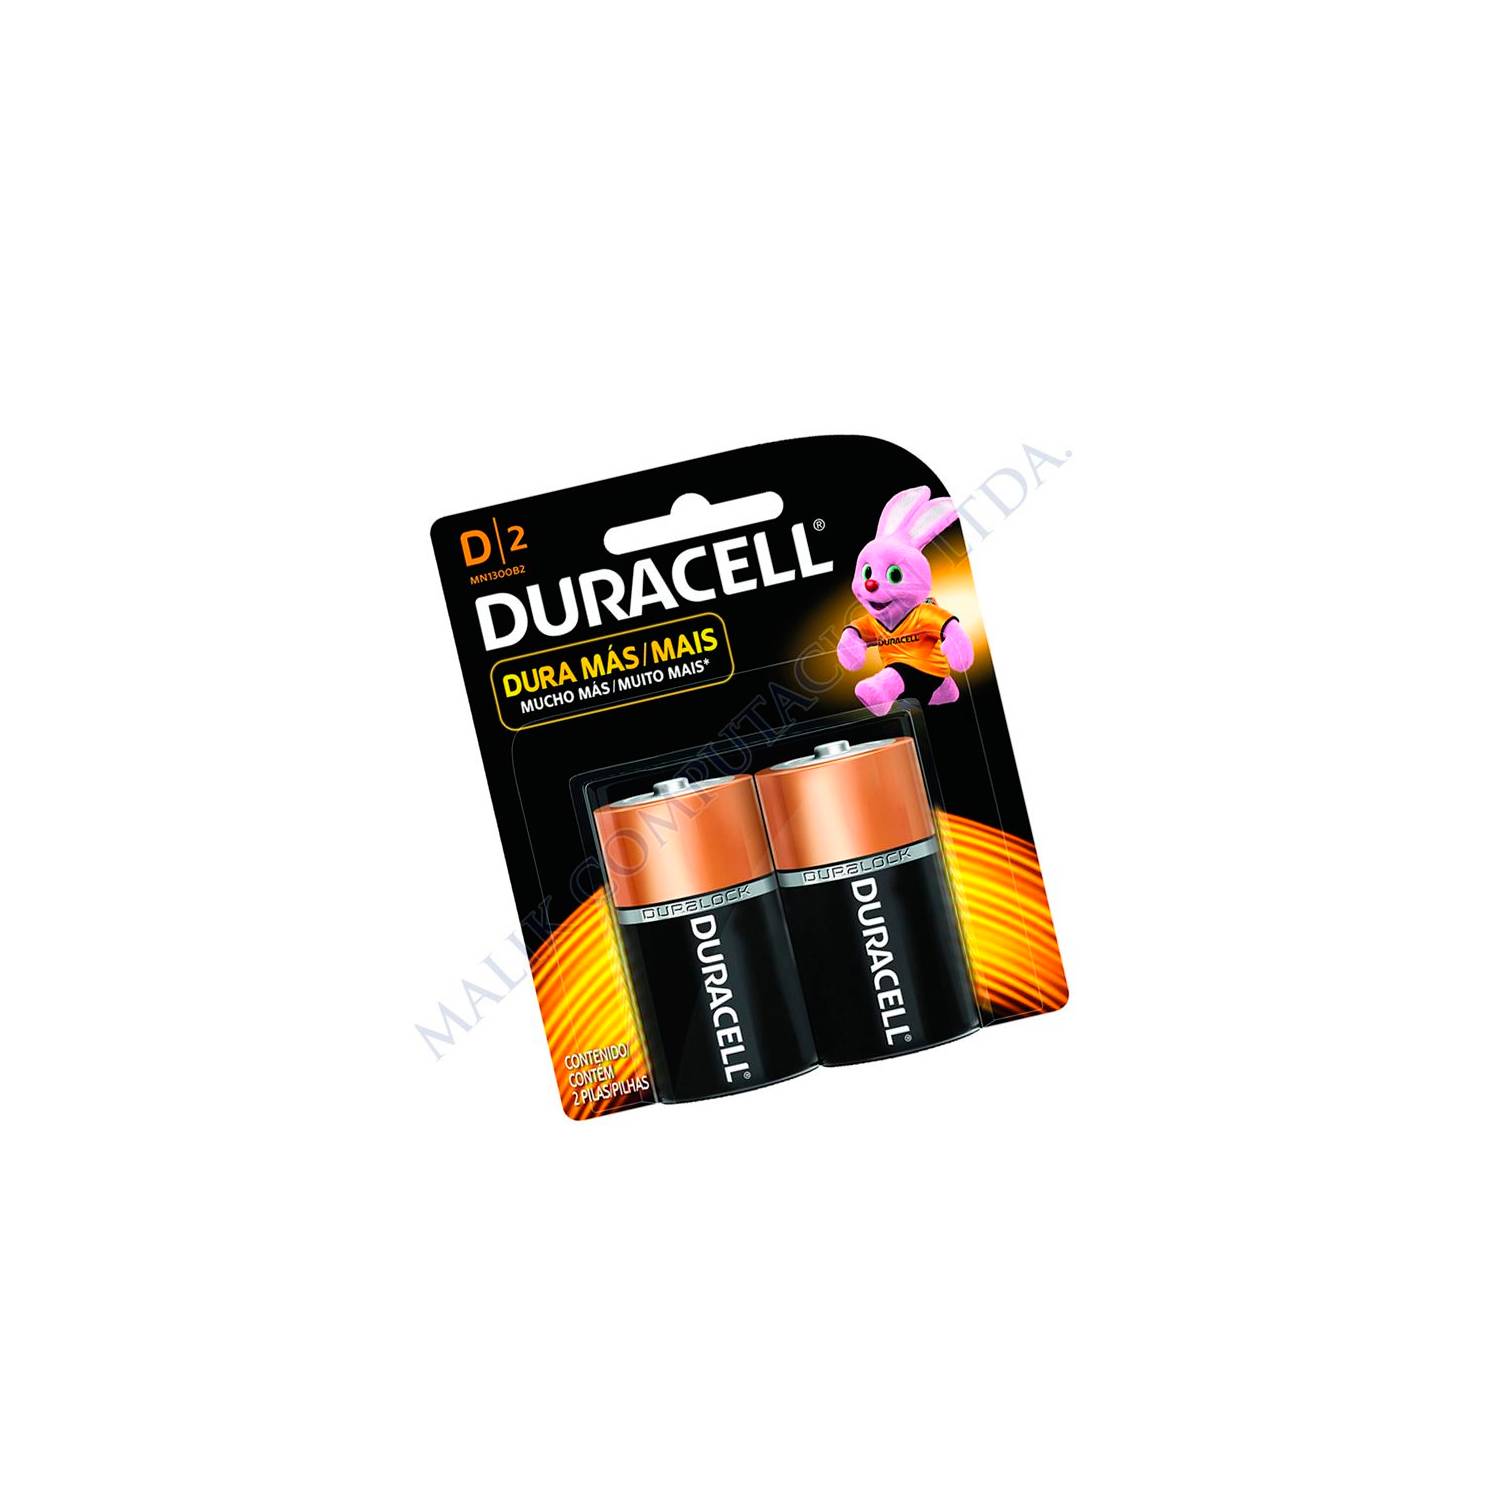 DURACELL PILA TIPO D PACK X2 DURACELL